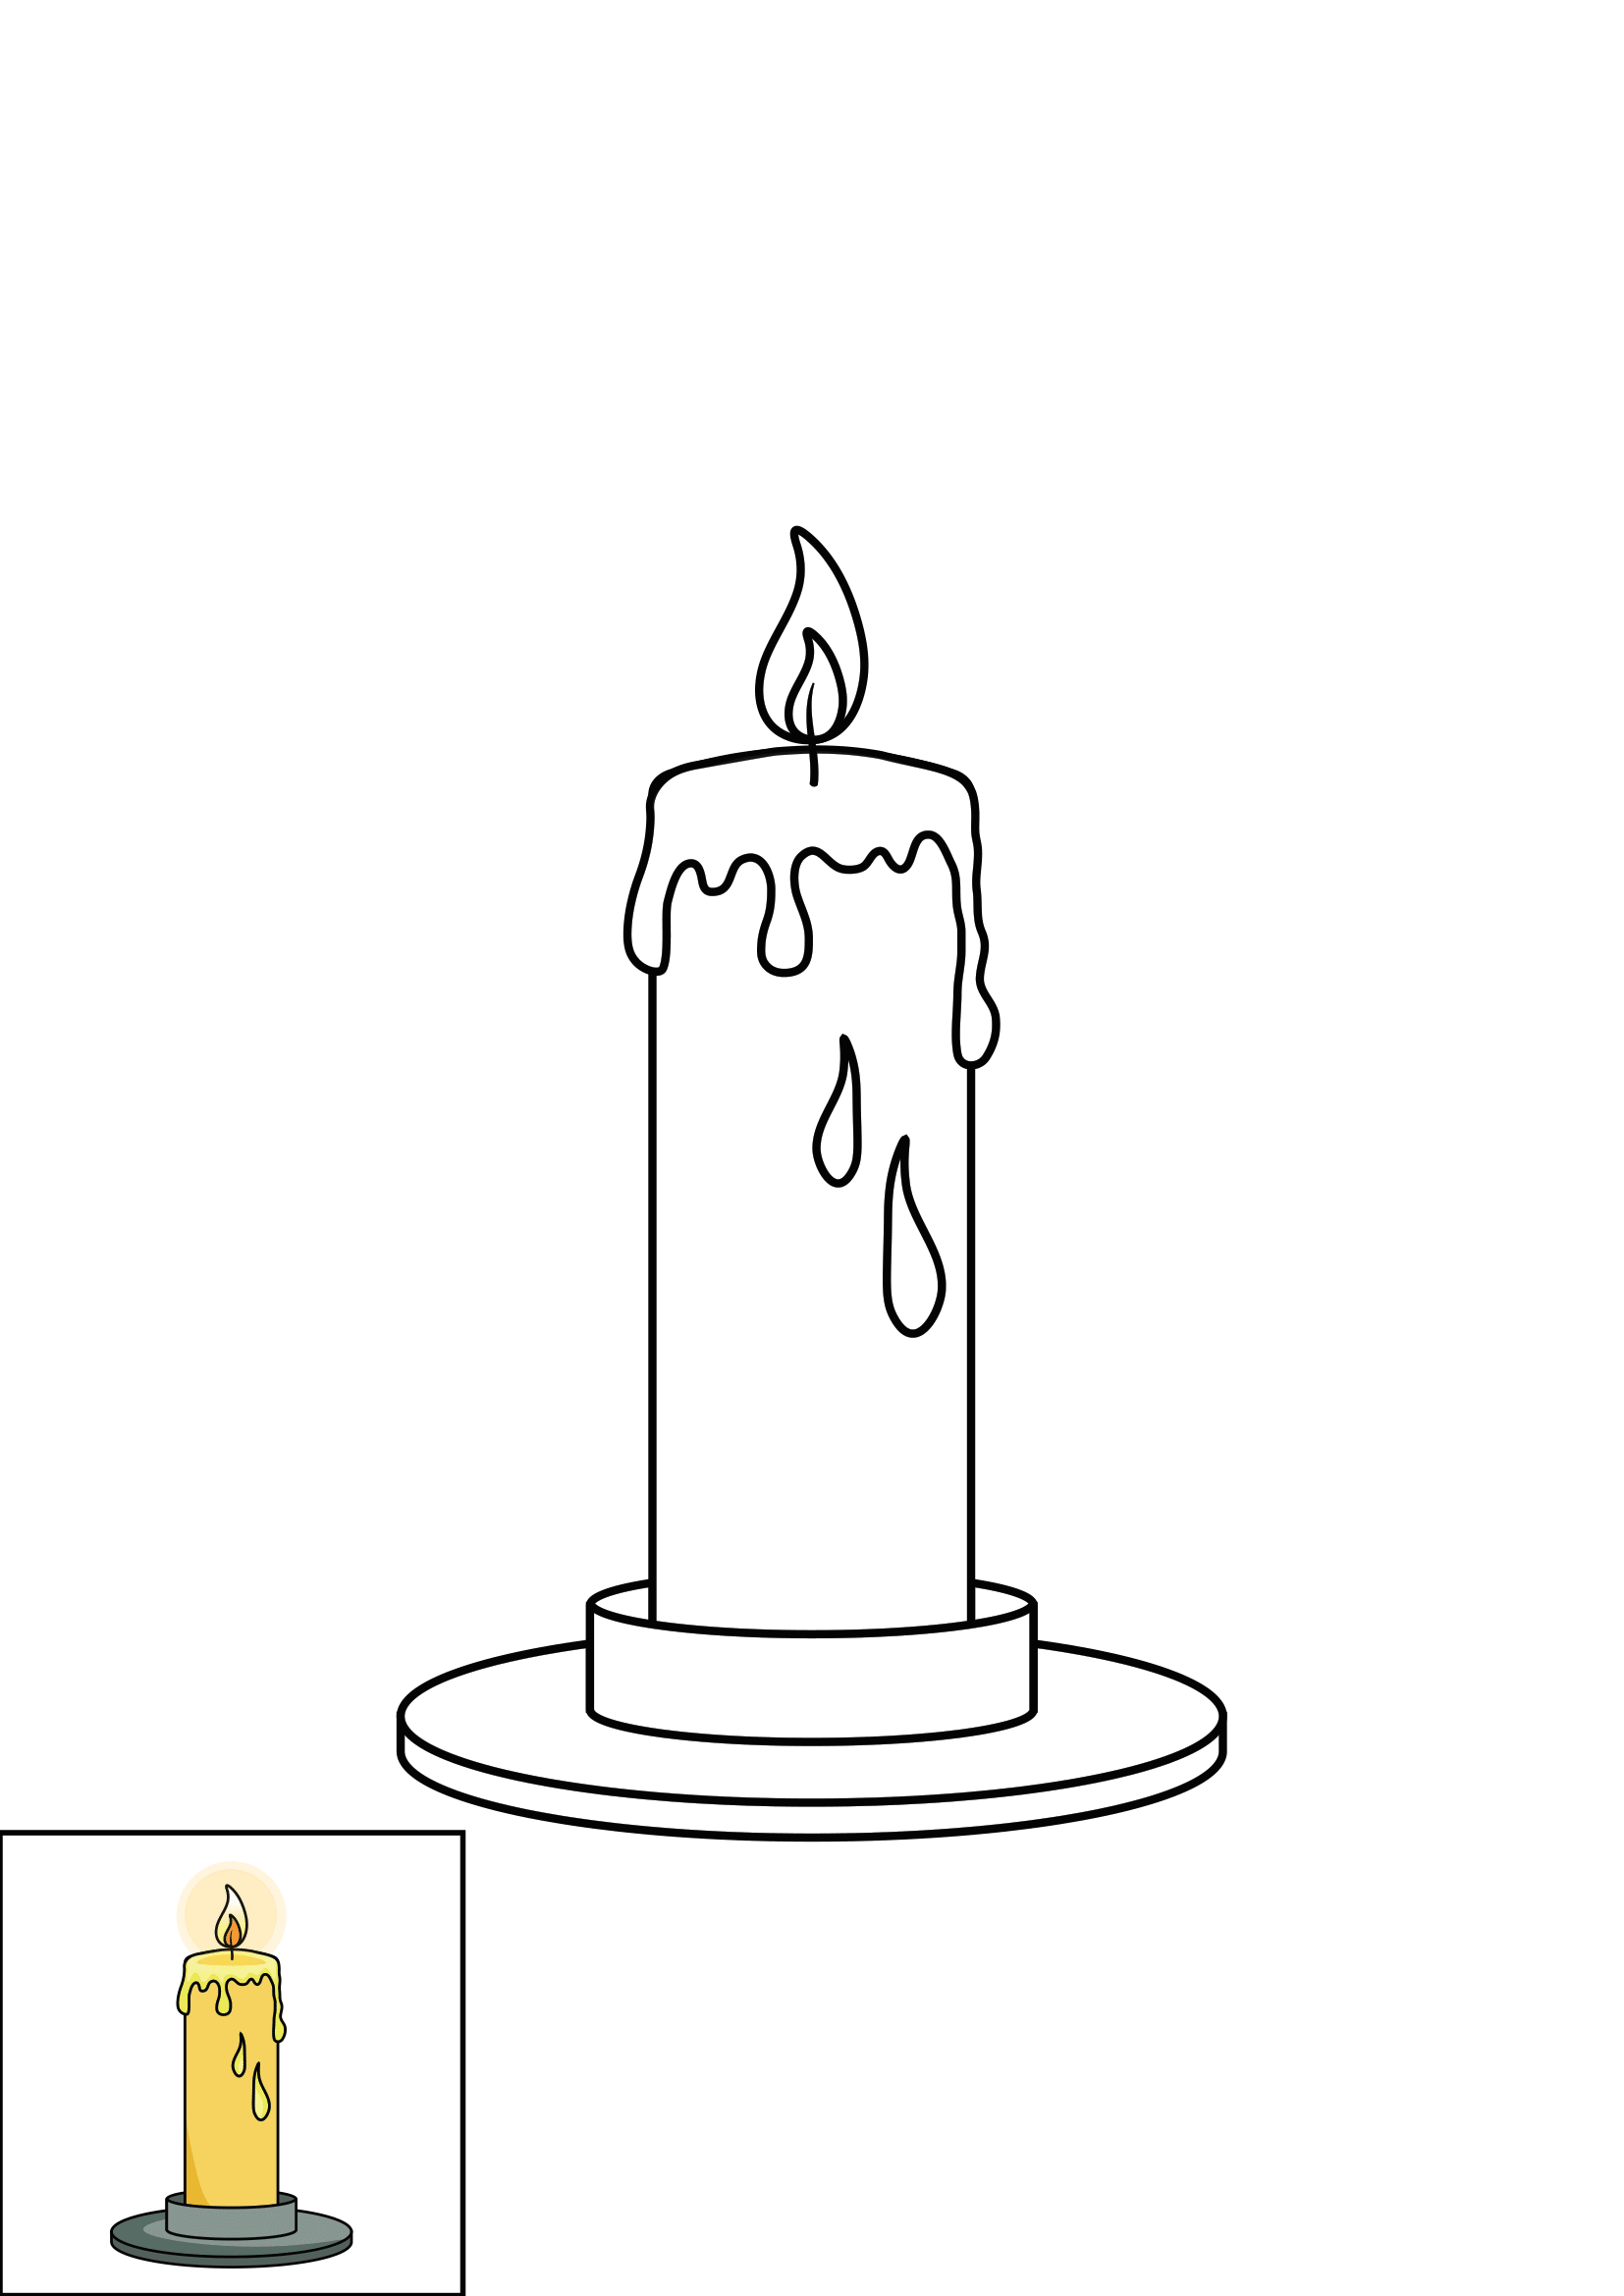 How to Draw A Candle Step by Step Printable Color